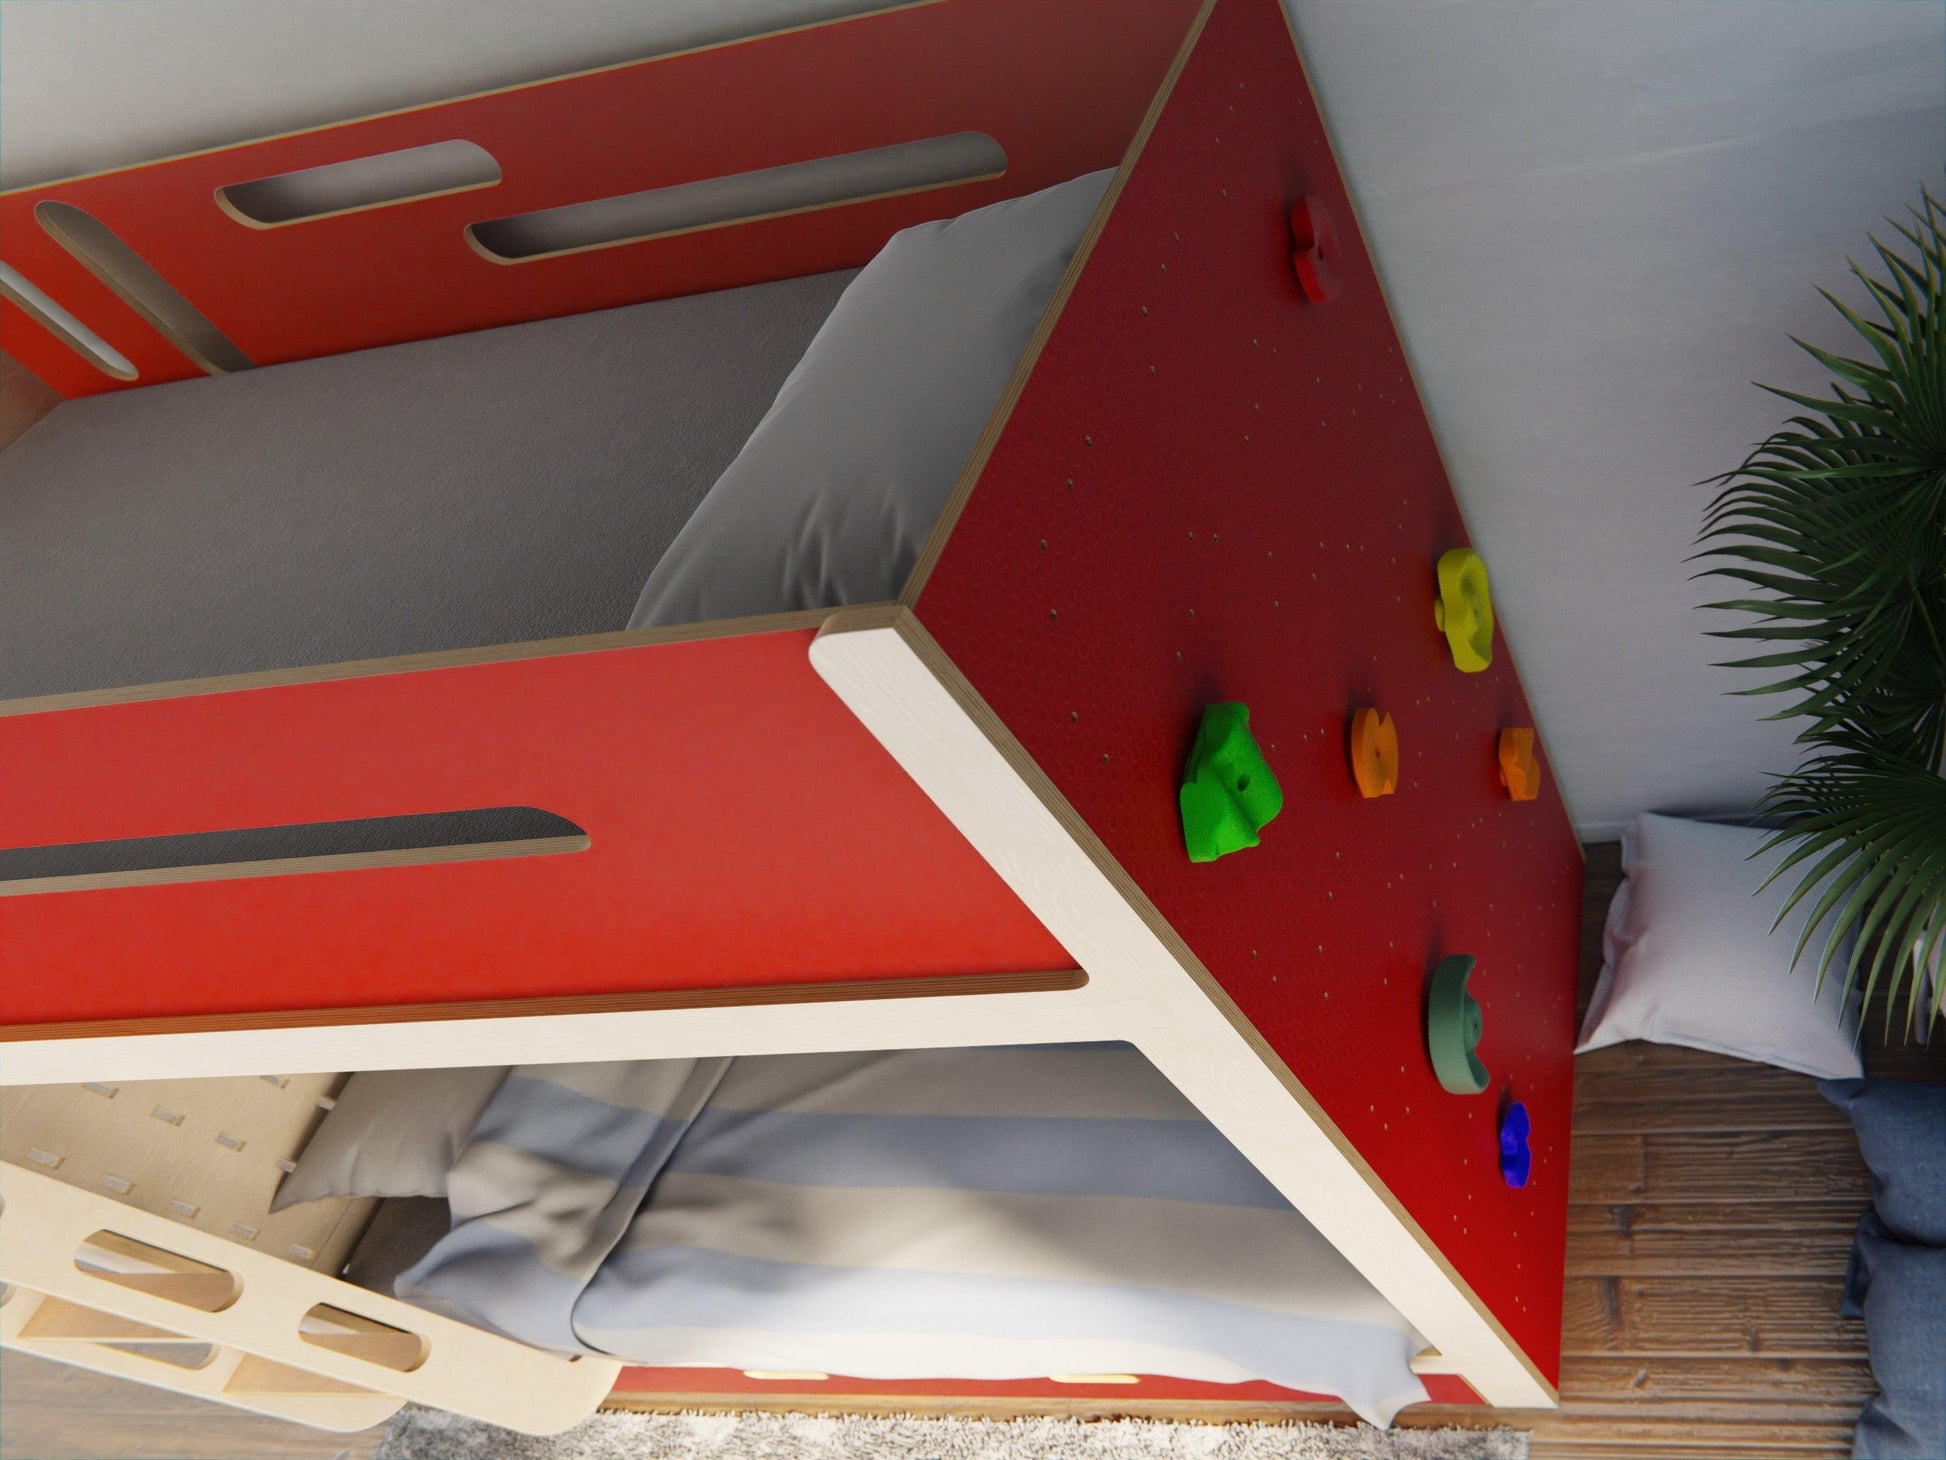 Raise your living with our elevated bunk beds. Includes rock climbing wall in captivating red.